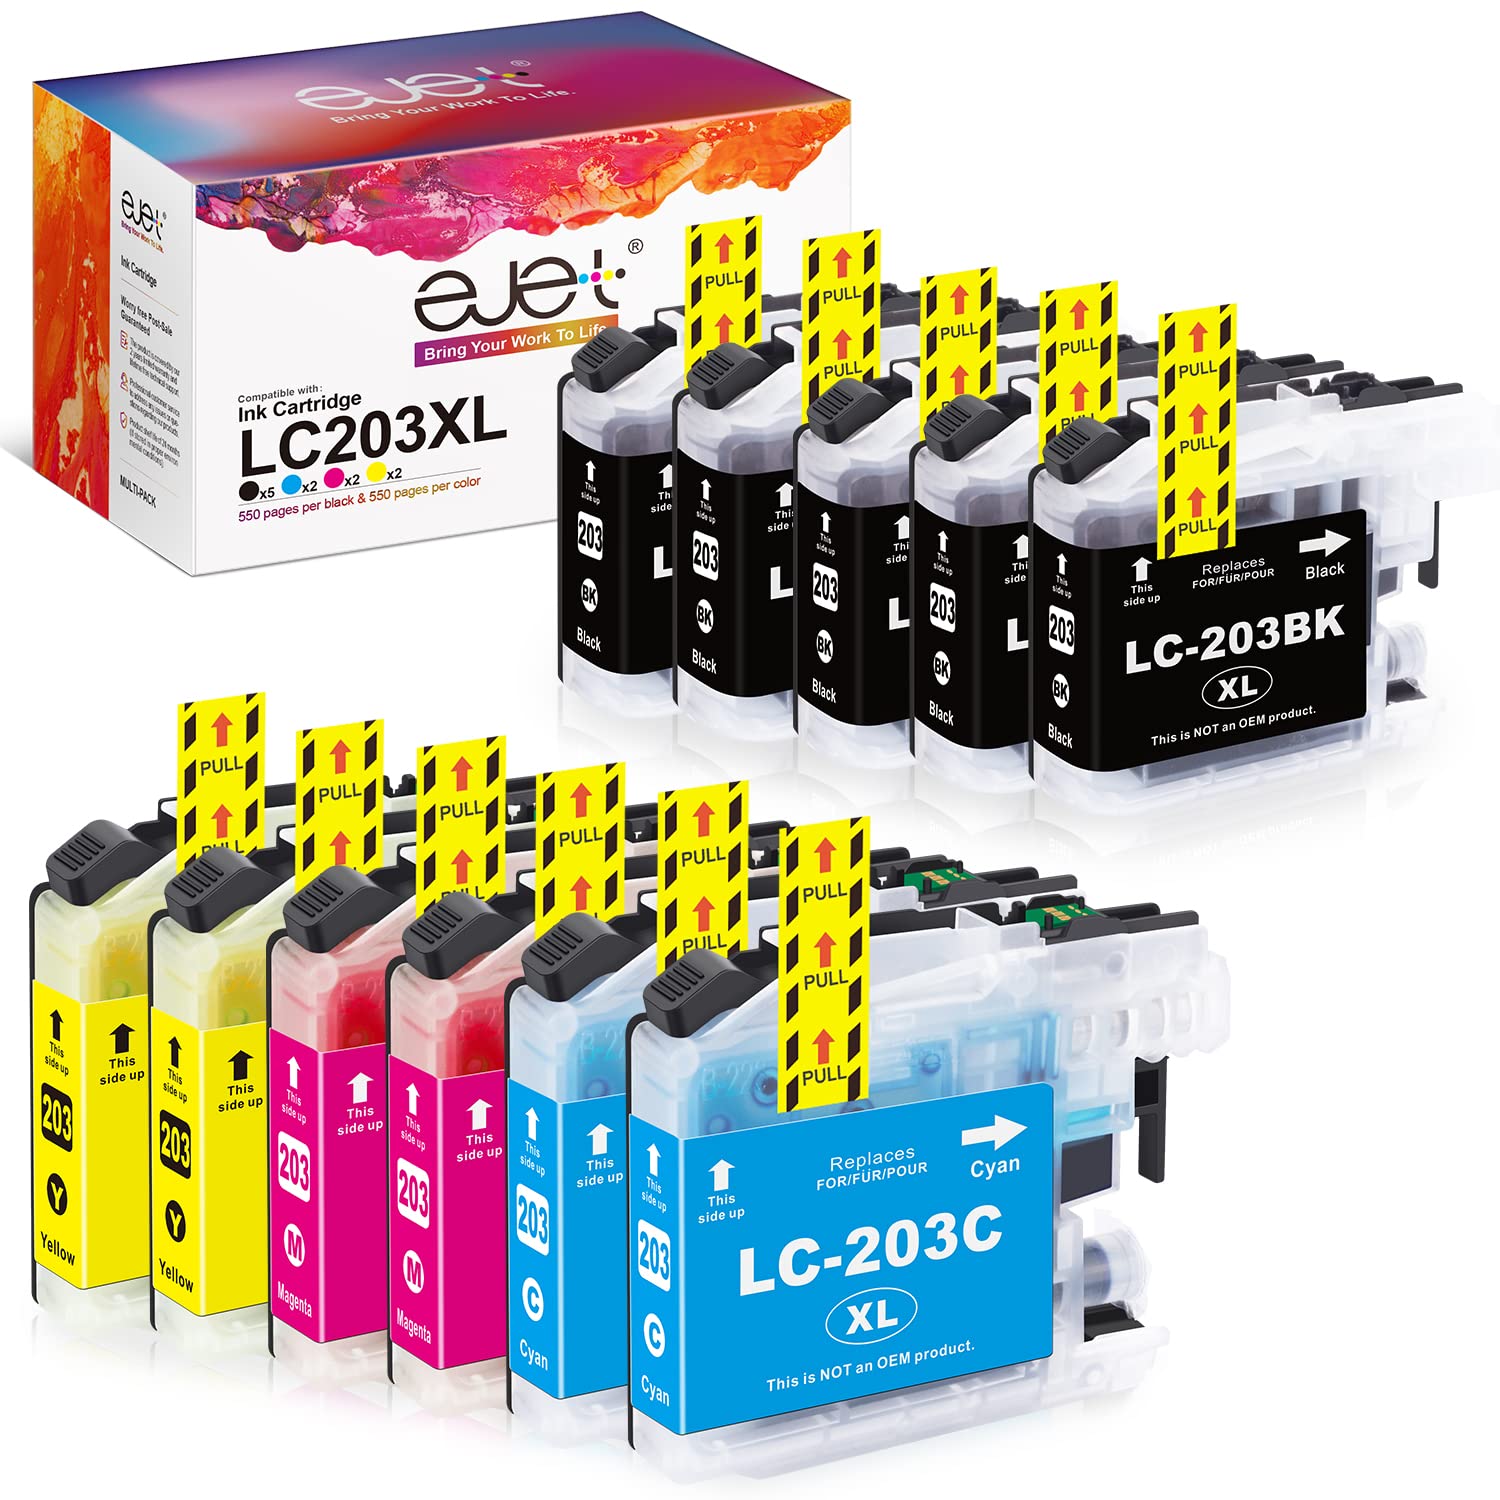 8 Amazing Brother Printer Ink Lc201/Lc203 for 2023